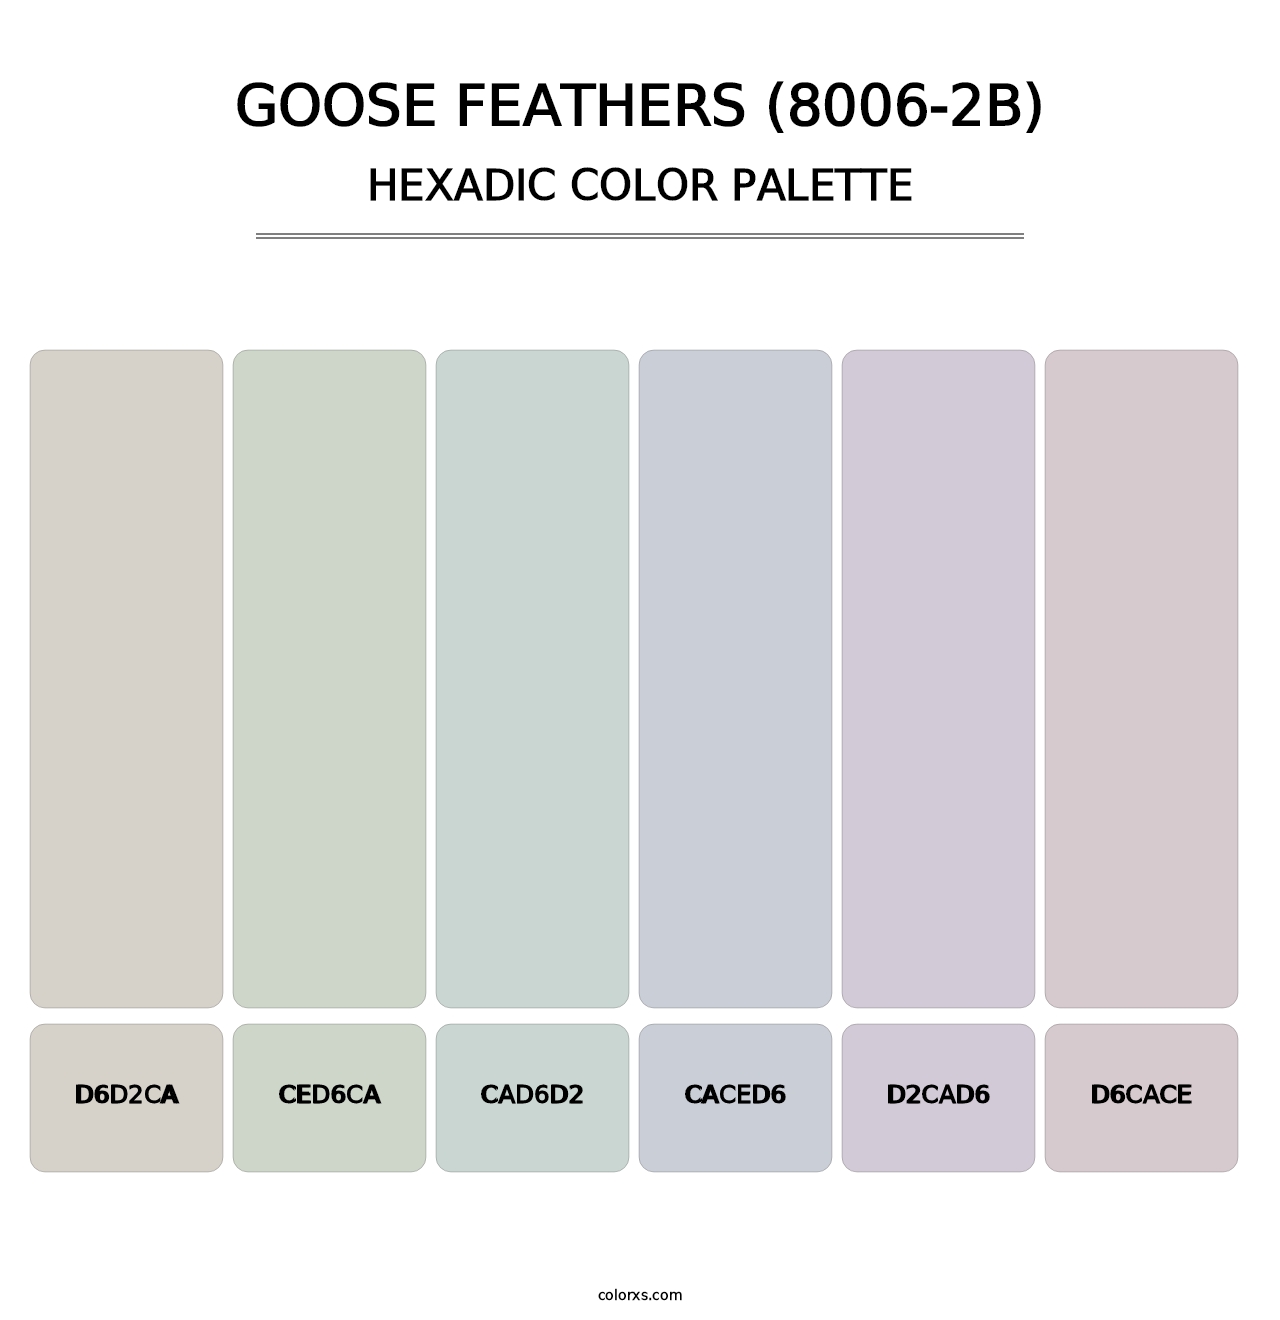 Goose Feathers (8006-2B) - Hexadic Color Palette